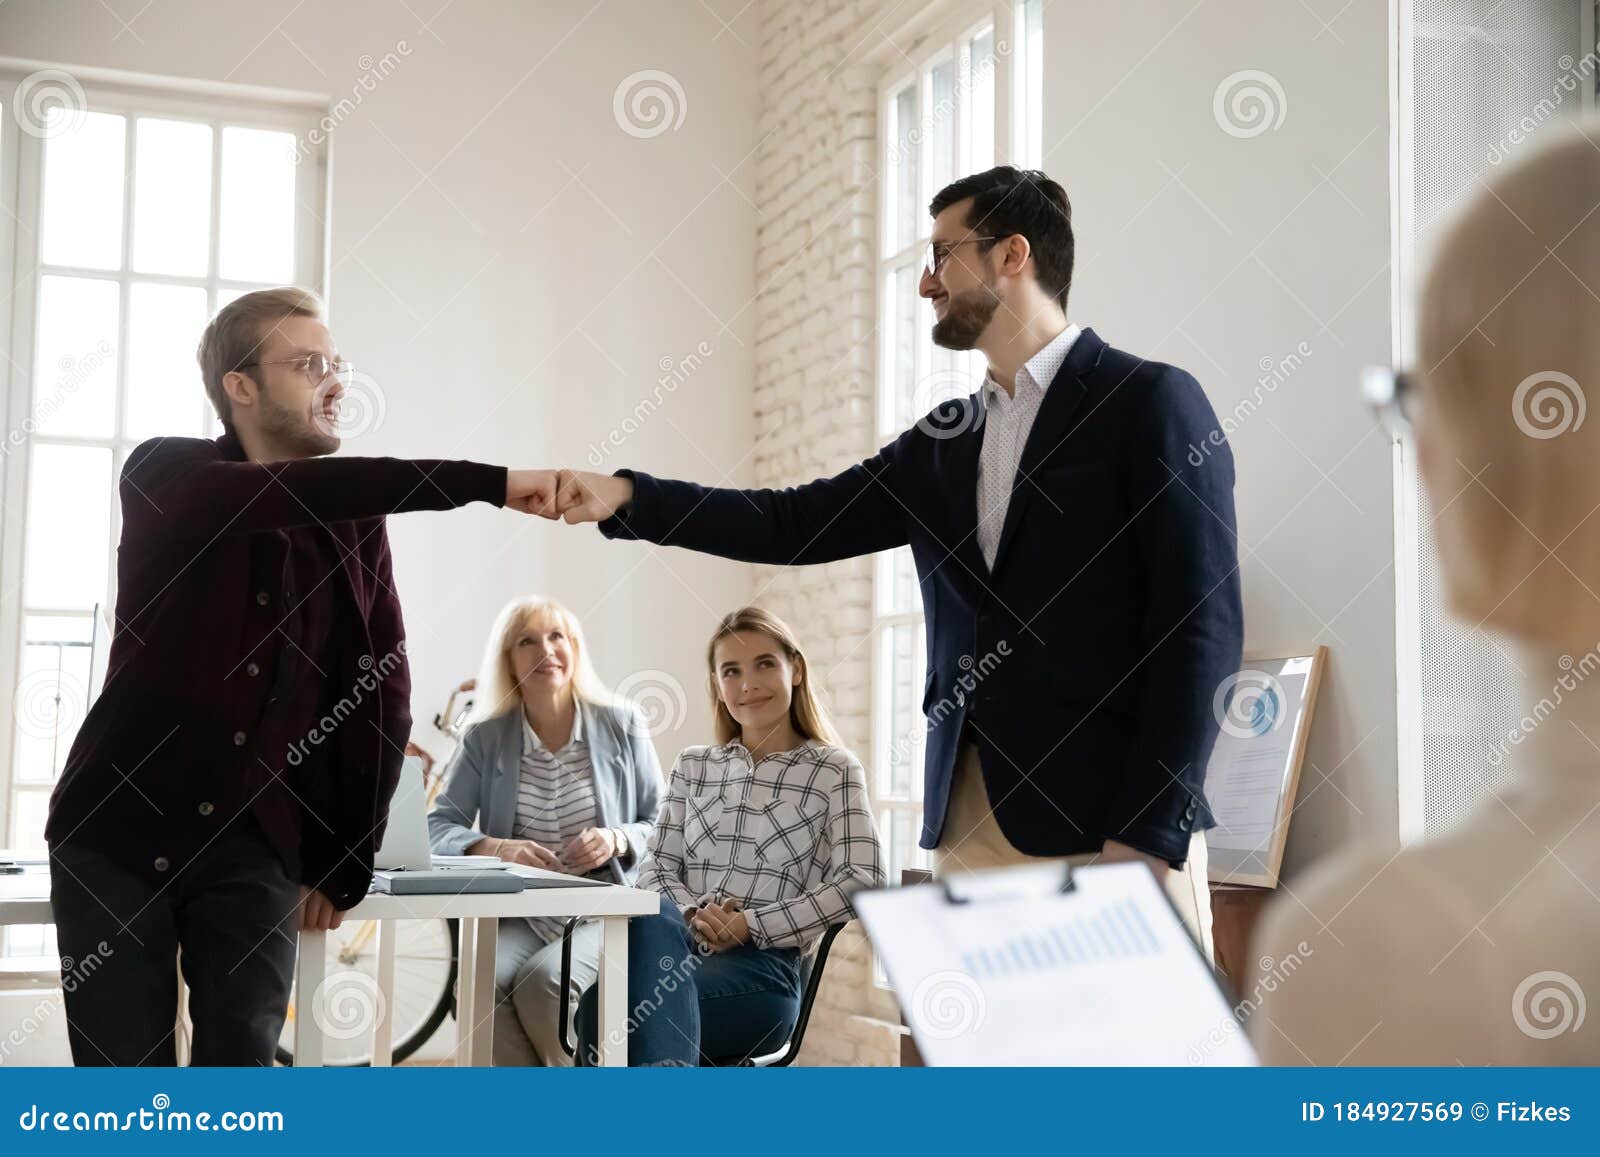 Smiling Young Male Employee Bumping Fists With Colleague In Office Stock Image Image Of 